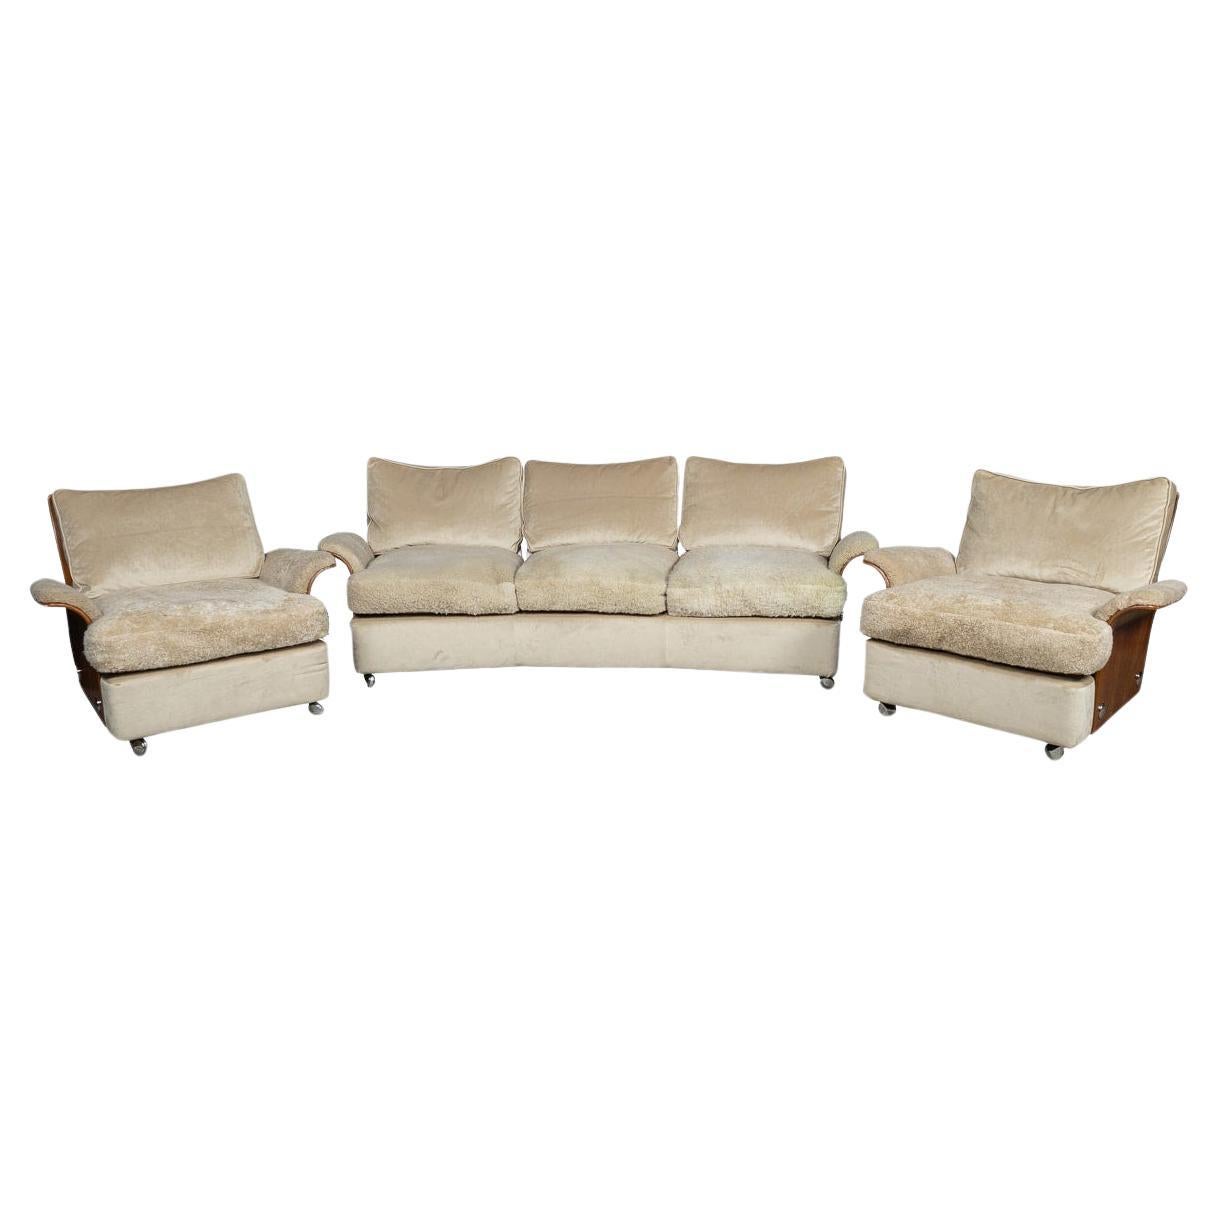 20th Century Cream Velvet "Tulip" Seating Suite By Km Wilkins For G Plan, 1970 For Sale